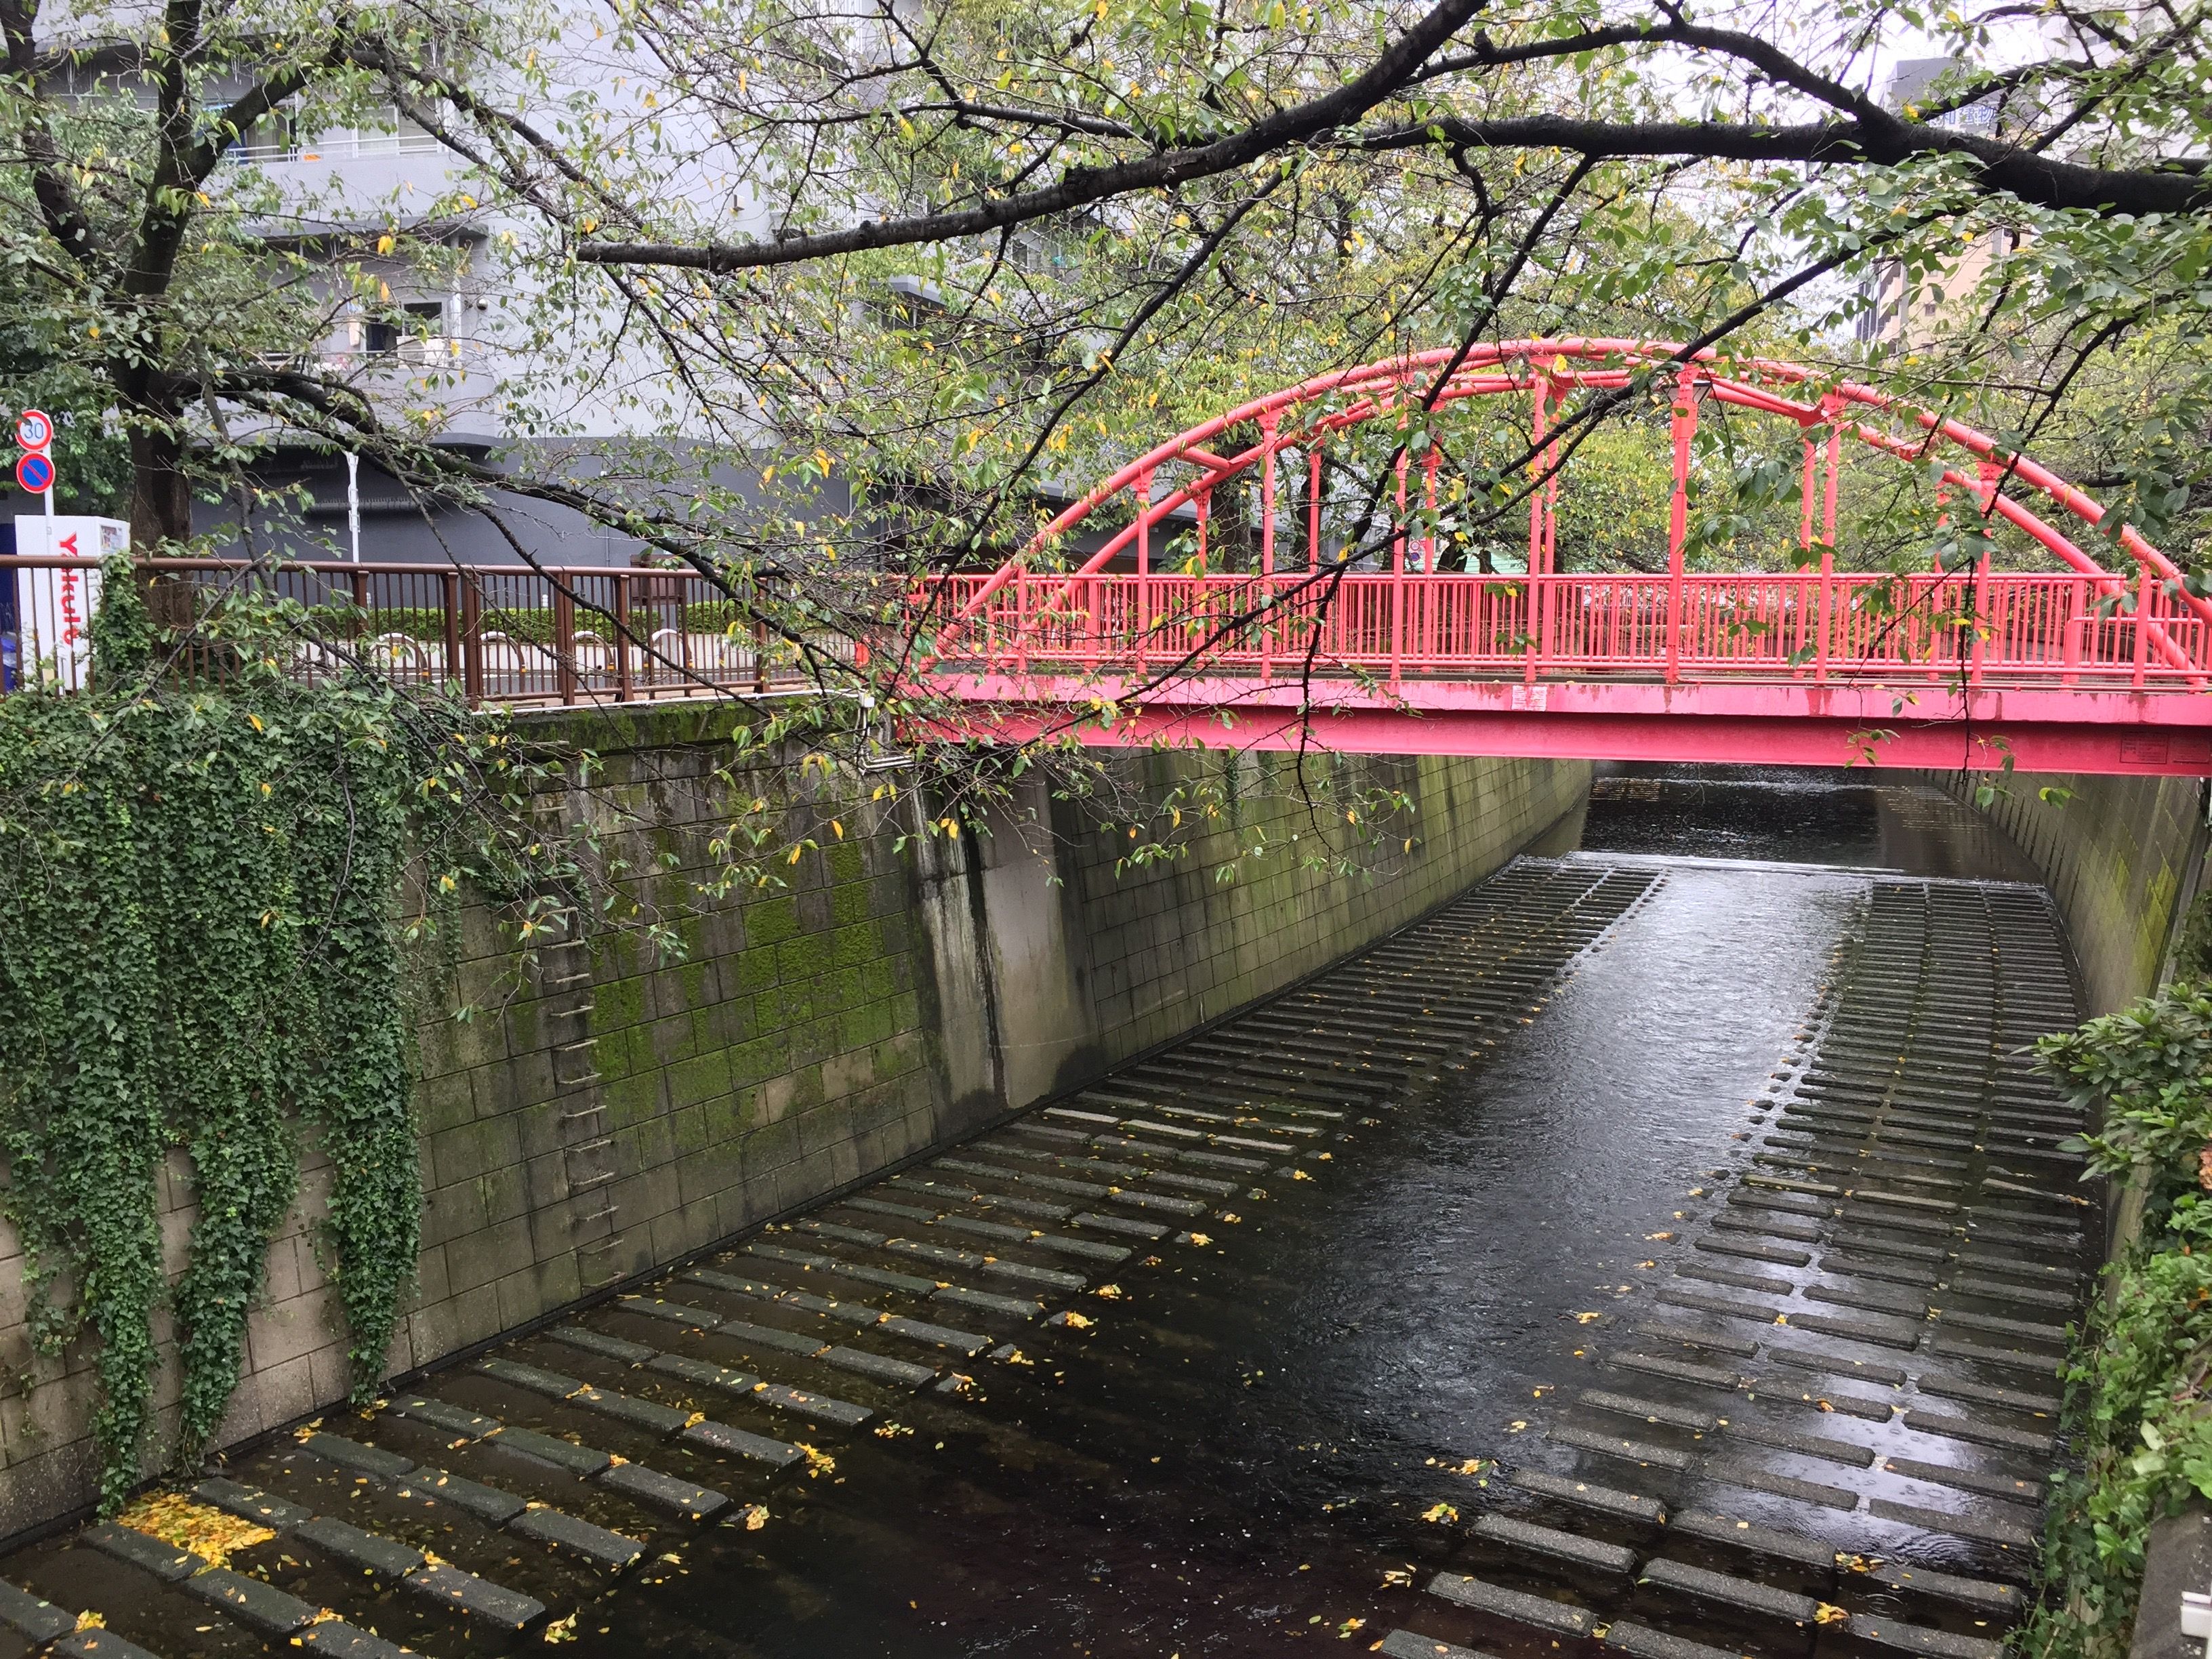 A complicated relationship with climate change and nature in Japan. A bridge over a channelized river in Naka-Meguro, Tokyo. Image by Daniel Merino. Japan, 2019.